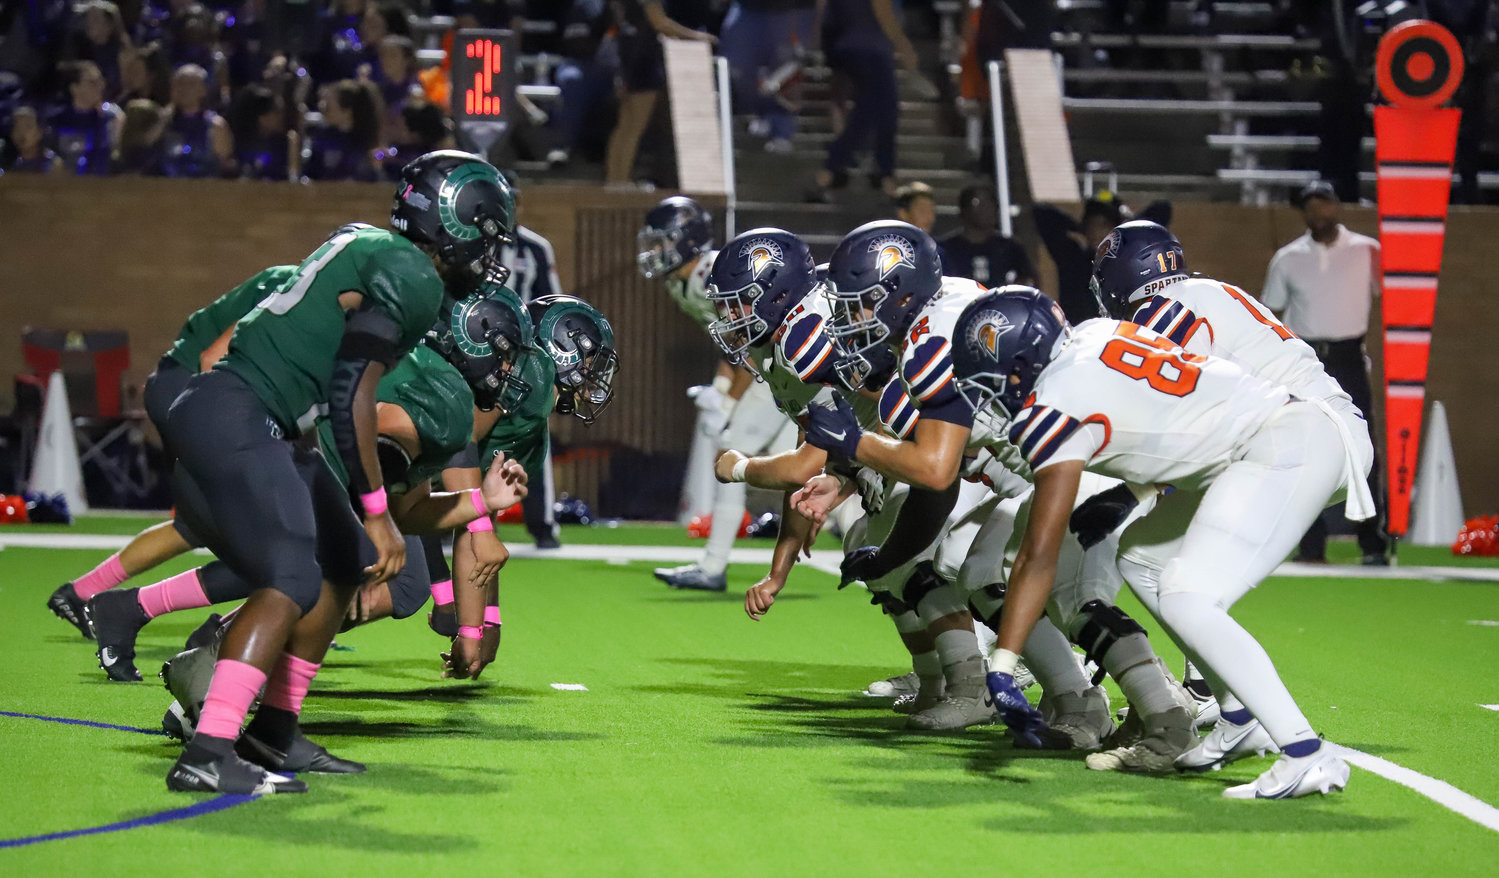 Seven Lakes and Mayde Creek's lineman take off at the snap of the ball.